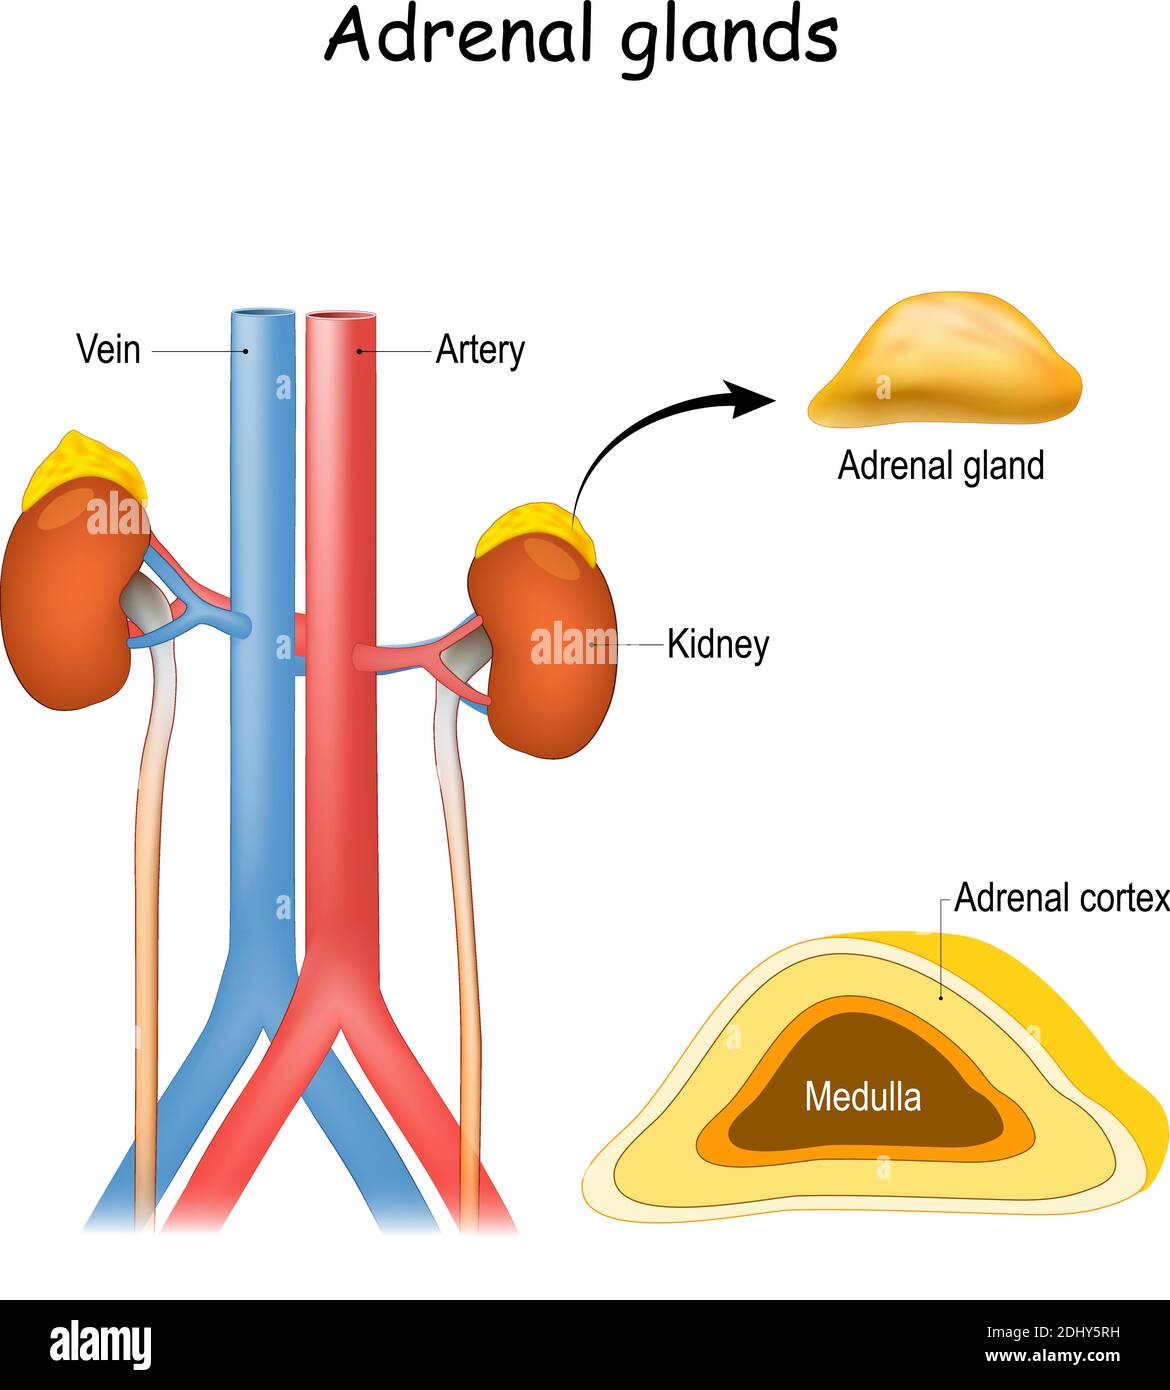 Adrenal glands anatomy. Kidney and ureter, aorta and Inferior vena cava. Structure and cross section of suprarenal glands. endocrine system. Stock Vector